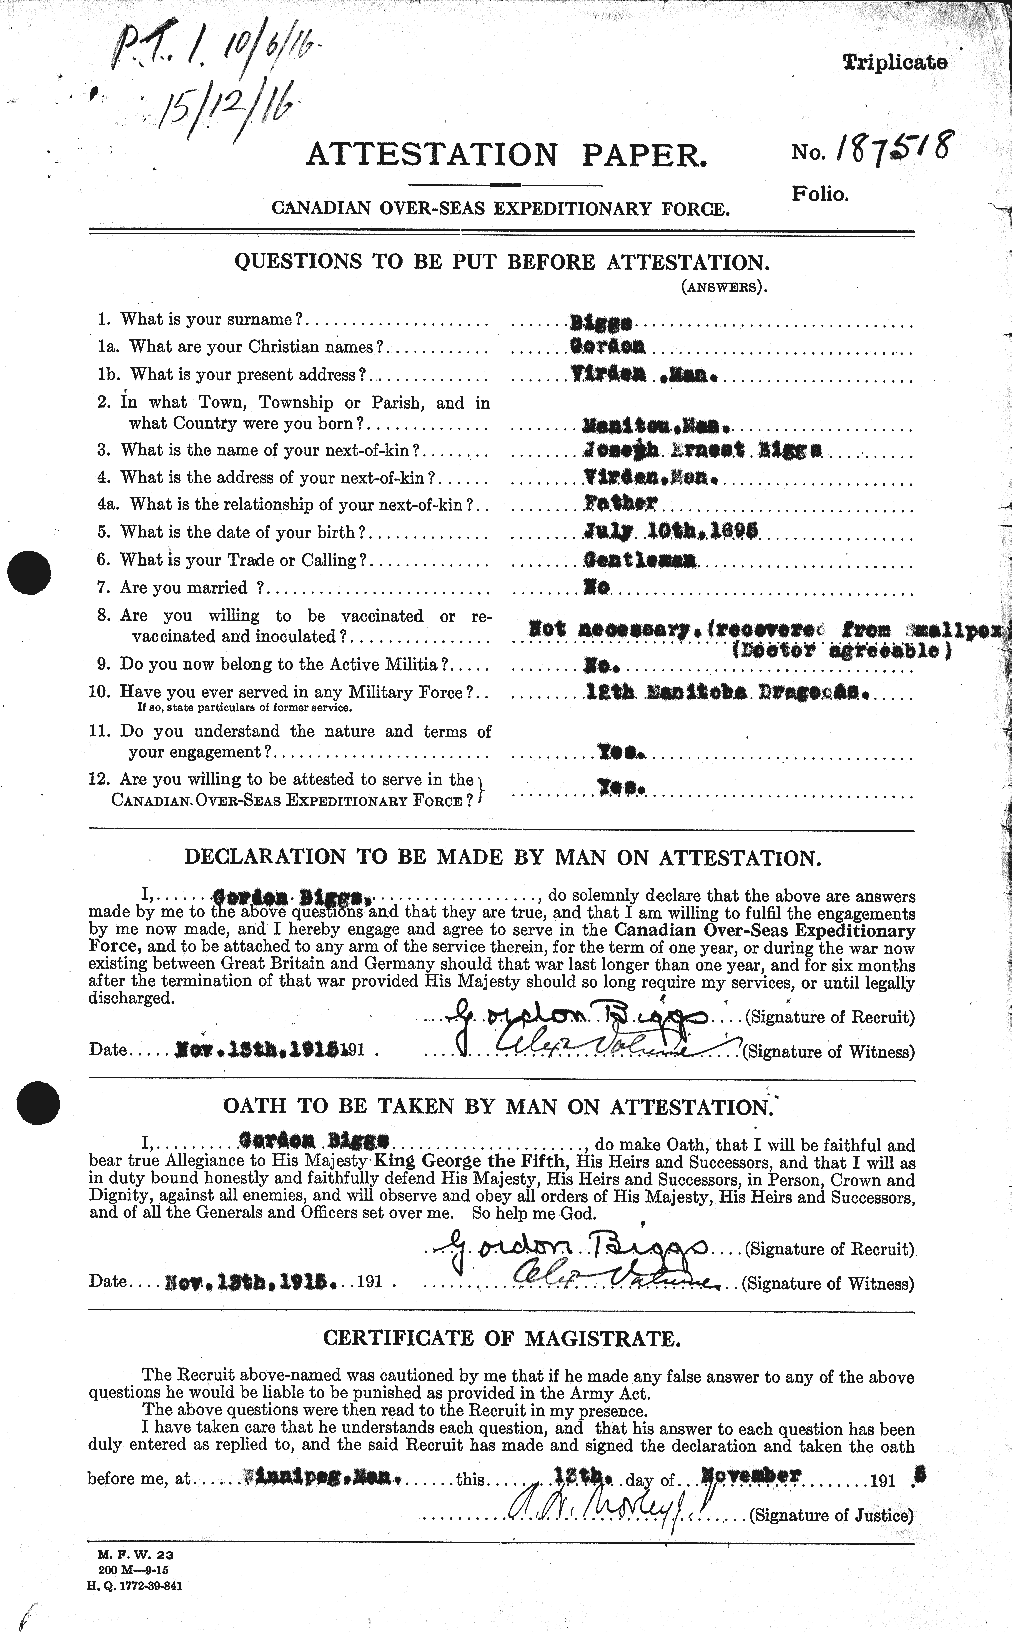 Personnel Records of the First World War - CEF 239200a